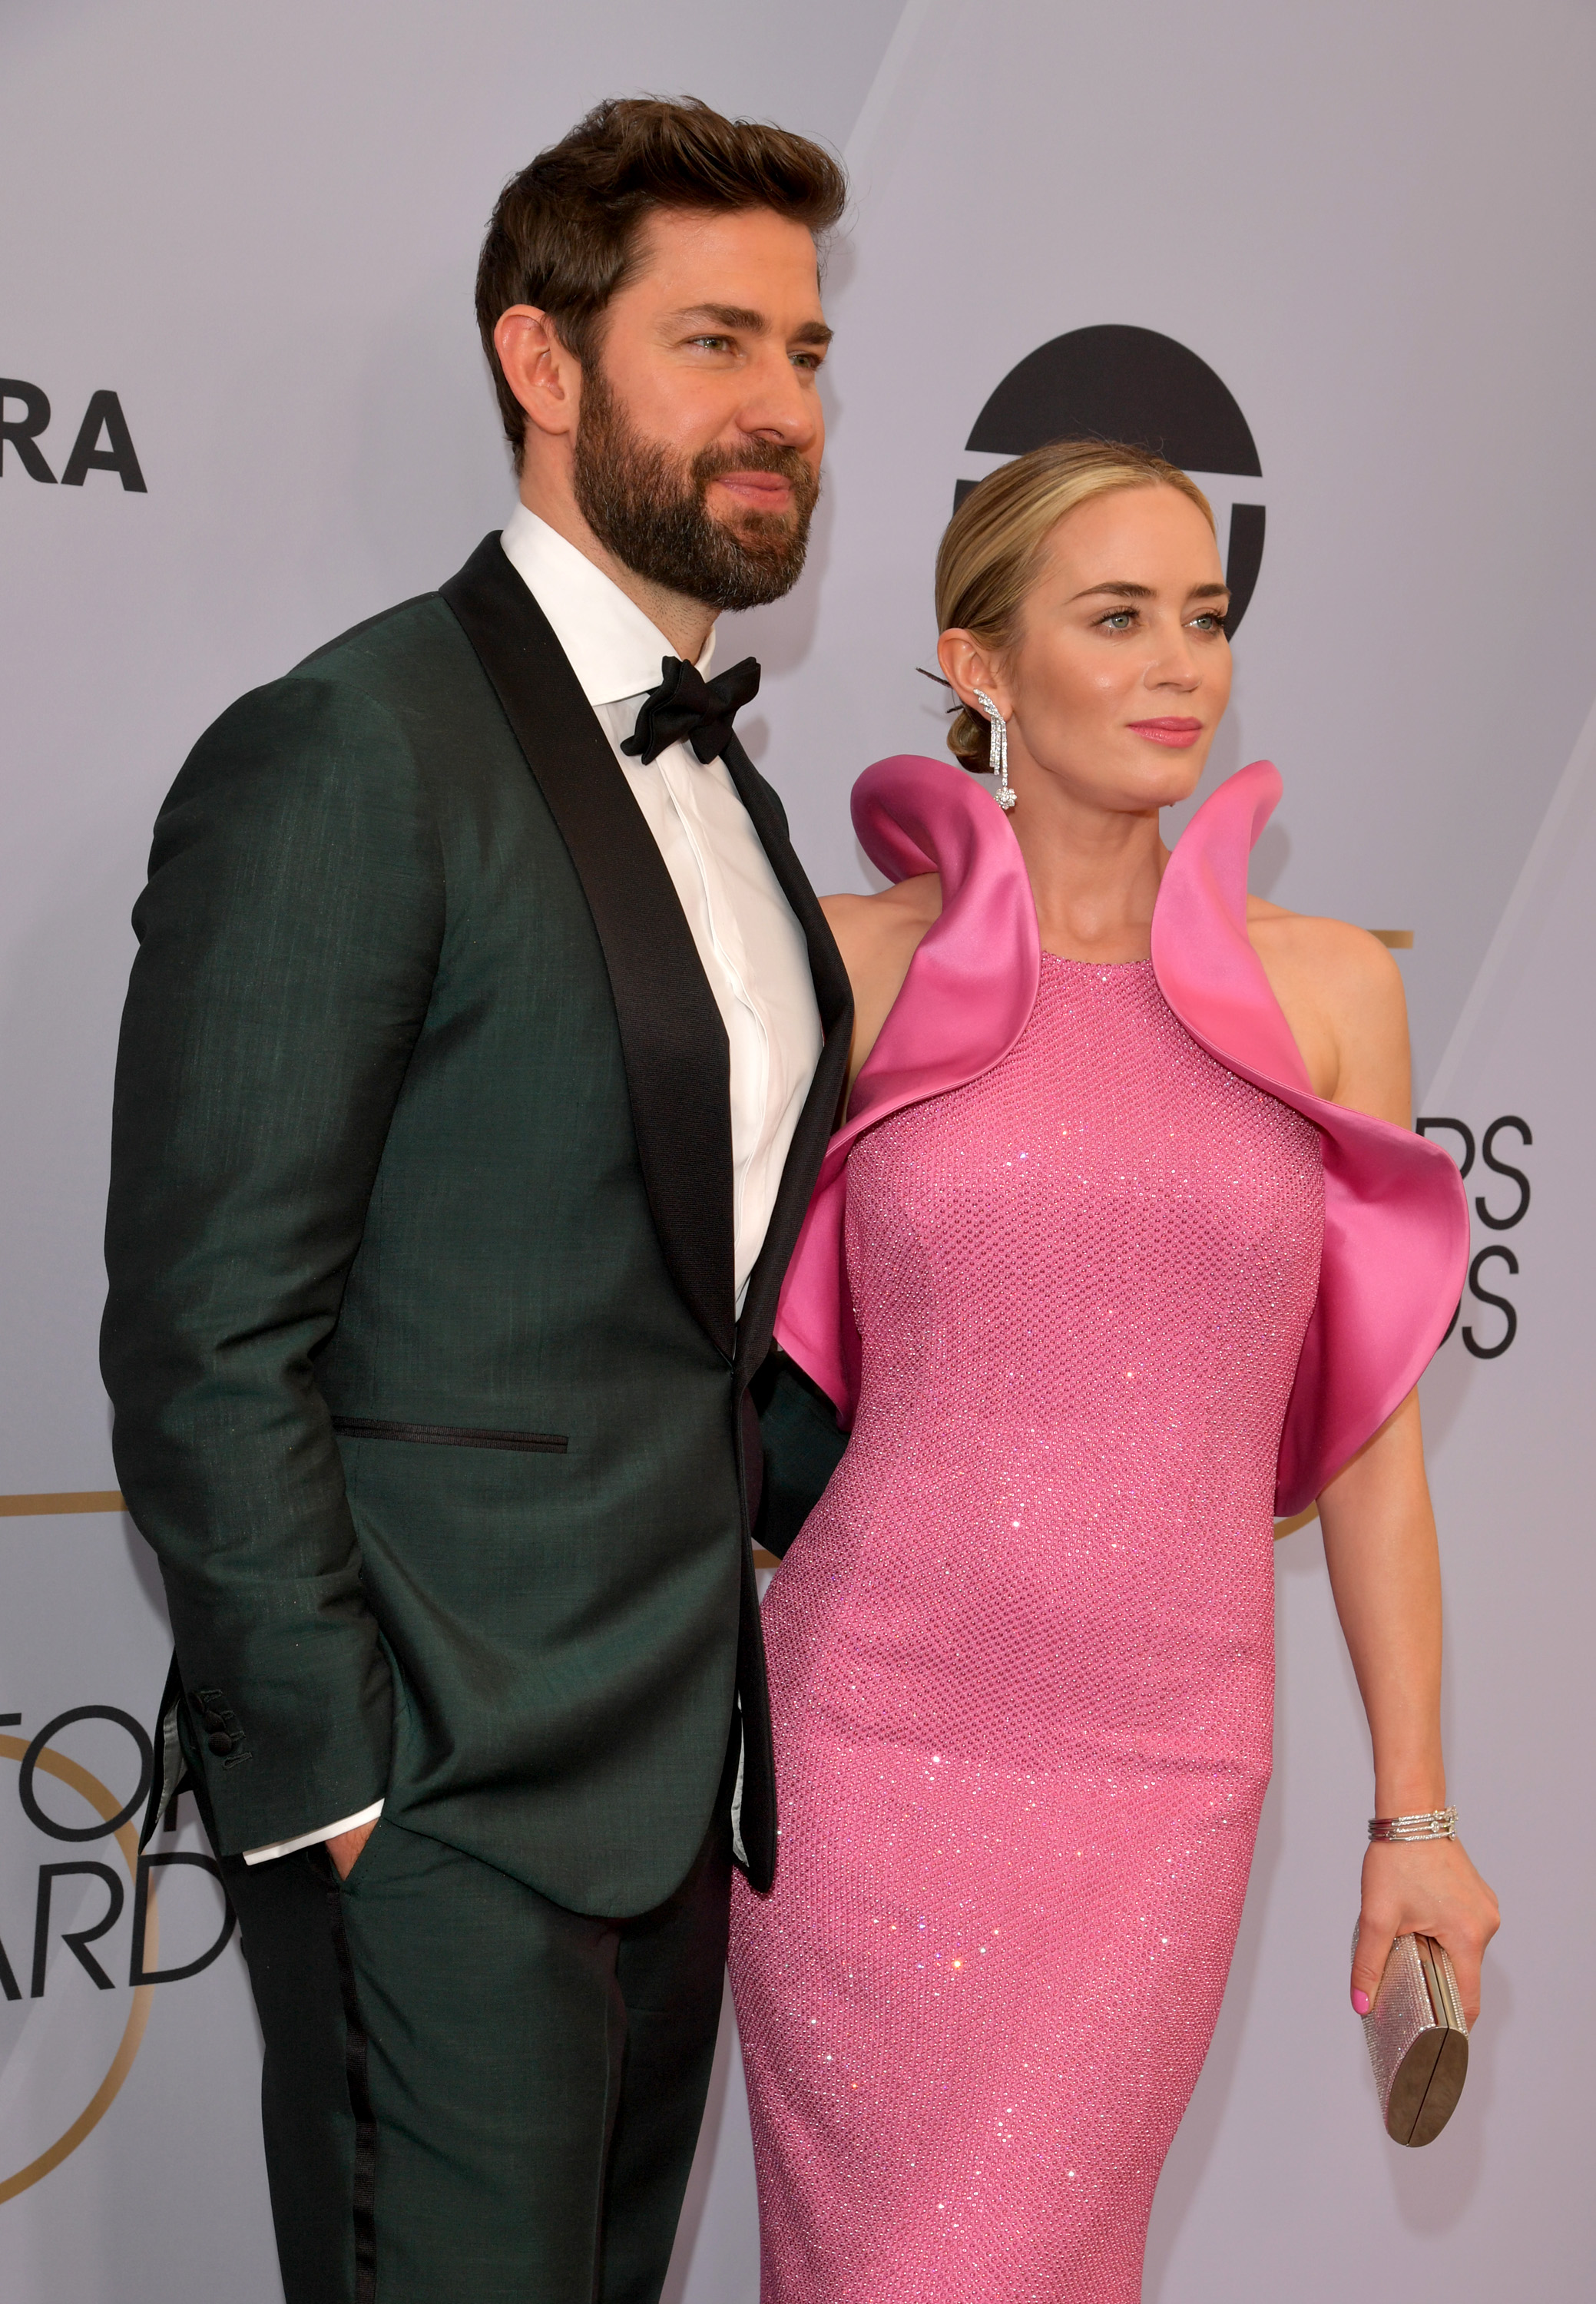 John Krasinski and Emily Blunt attends the 25th Annual Screen Actors Guild Awards at The Shrine Auditorium in Los Angeles, California, on January 27, 2019. | Source: Getty Images